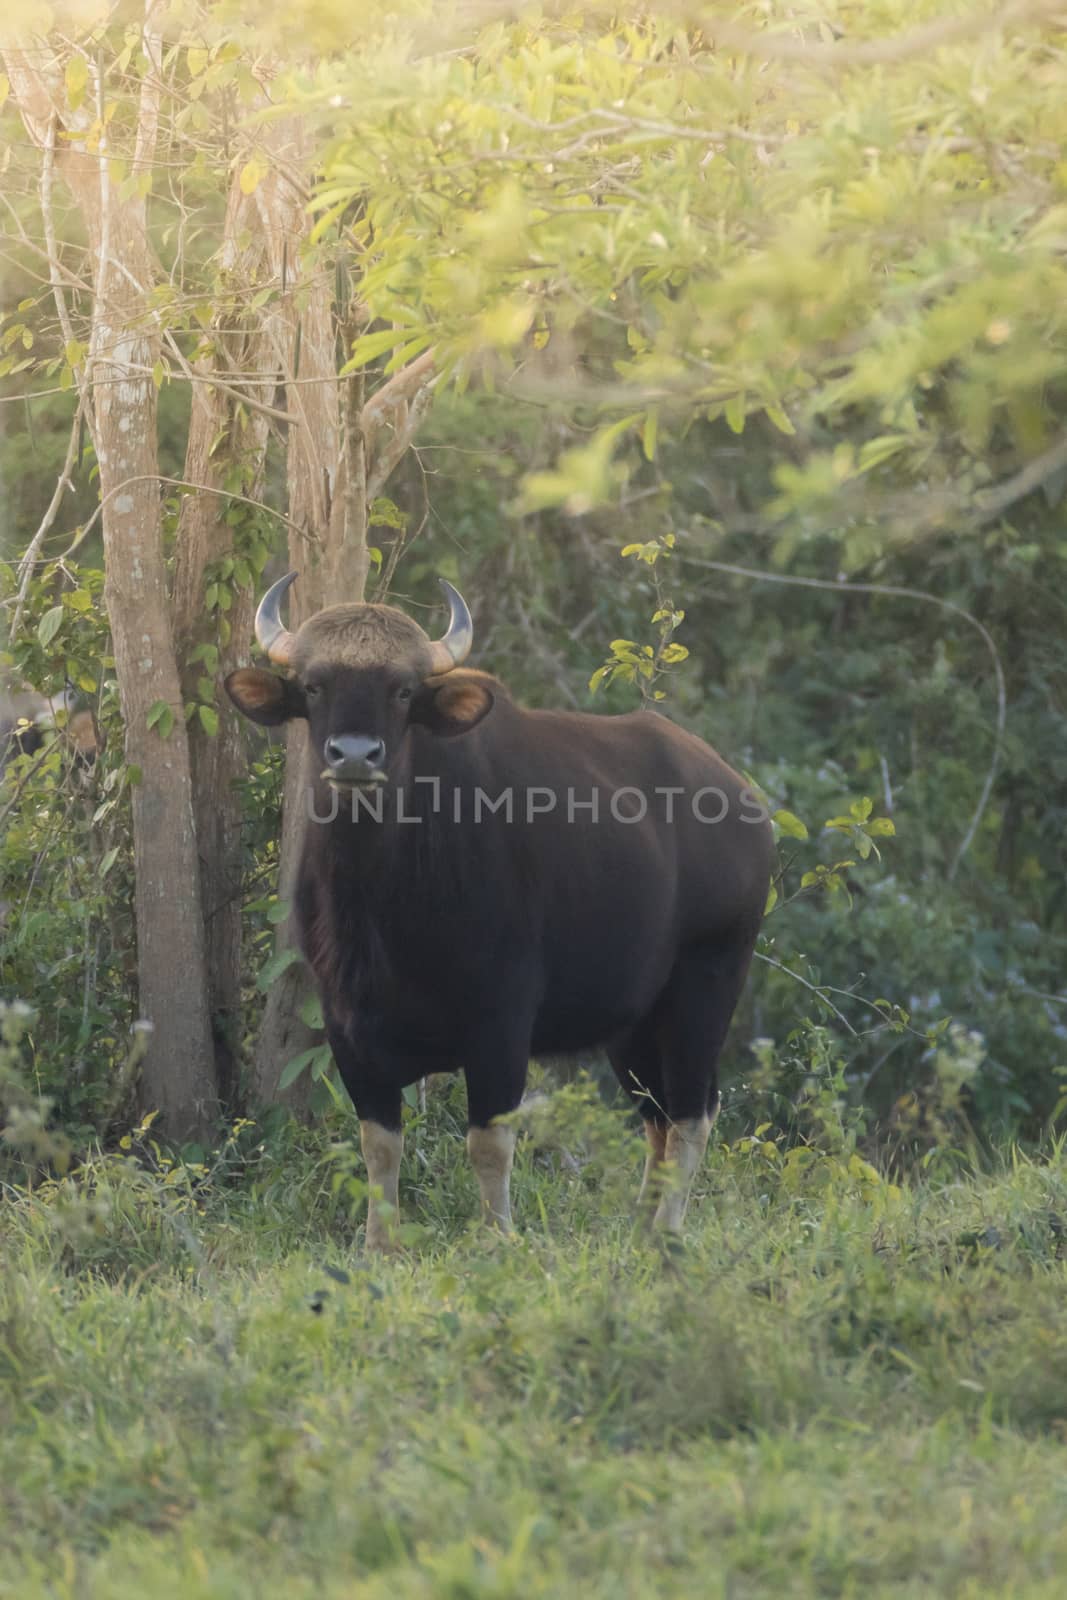 Guar is big body , black skin in old years,red skin in young years.Gaur historically occurred throughout mainland South and Southeast Asia.